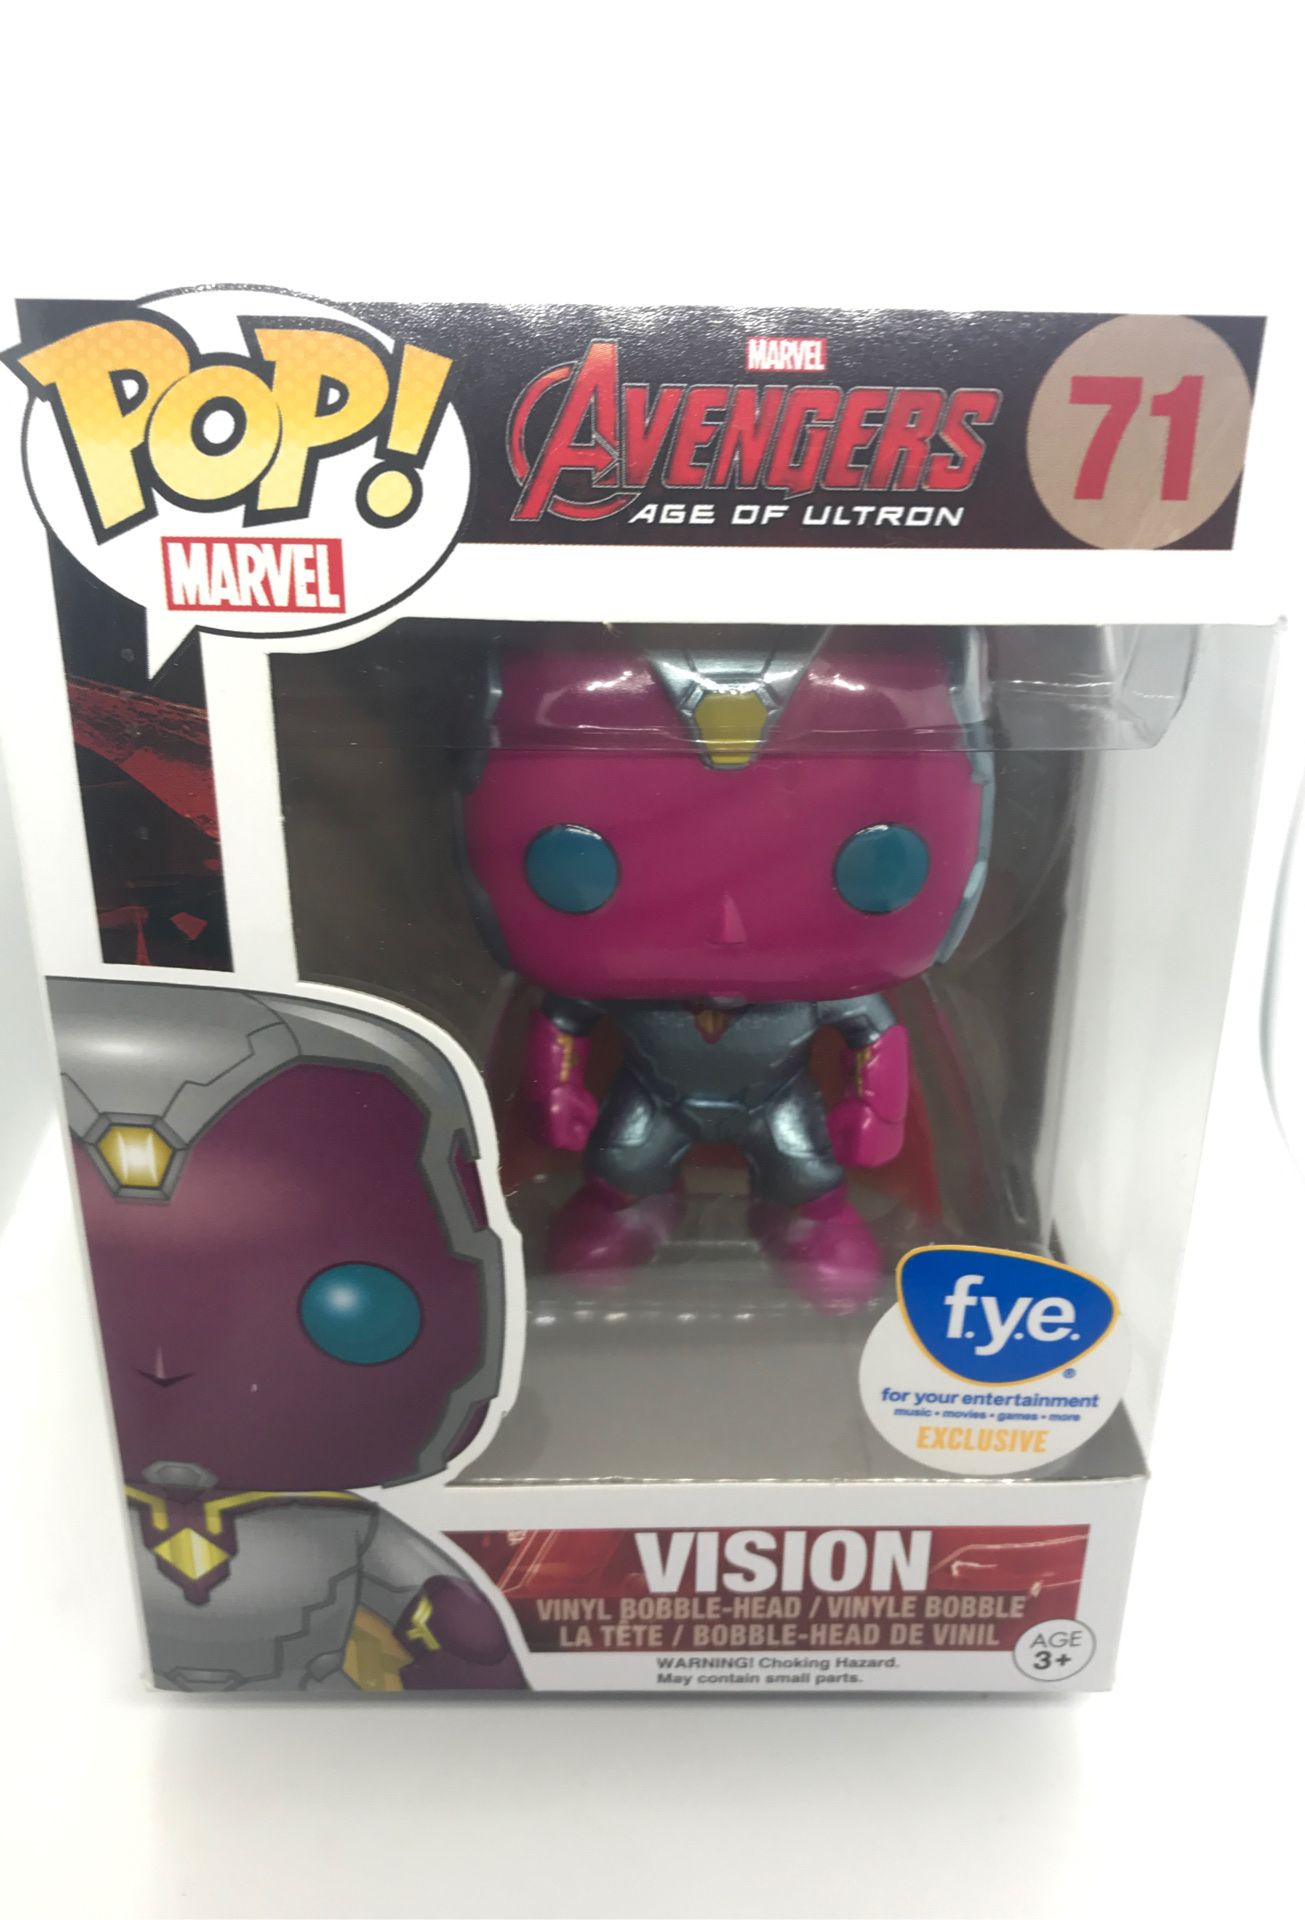 Avengers Age of Ultron Vision FYE exclusive Funko POP